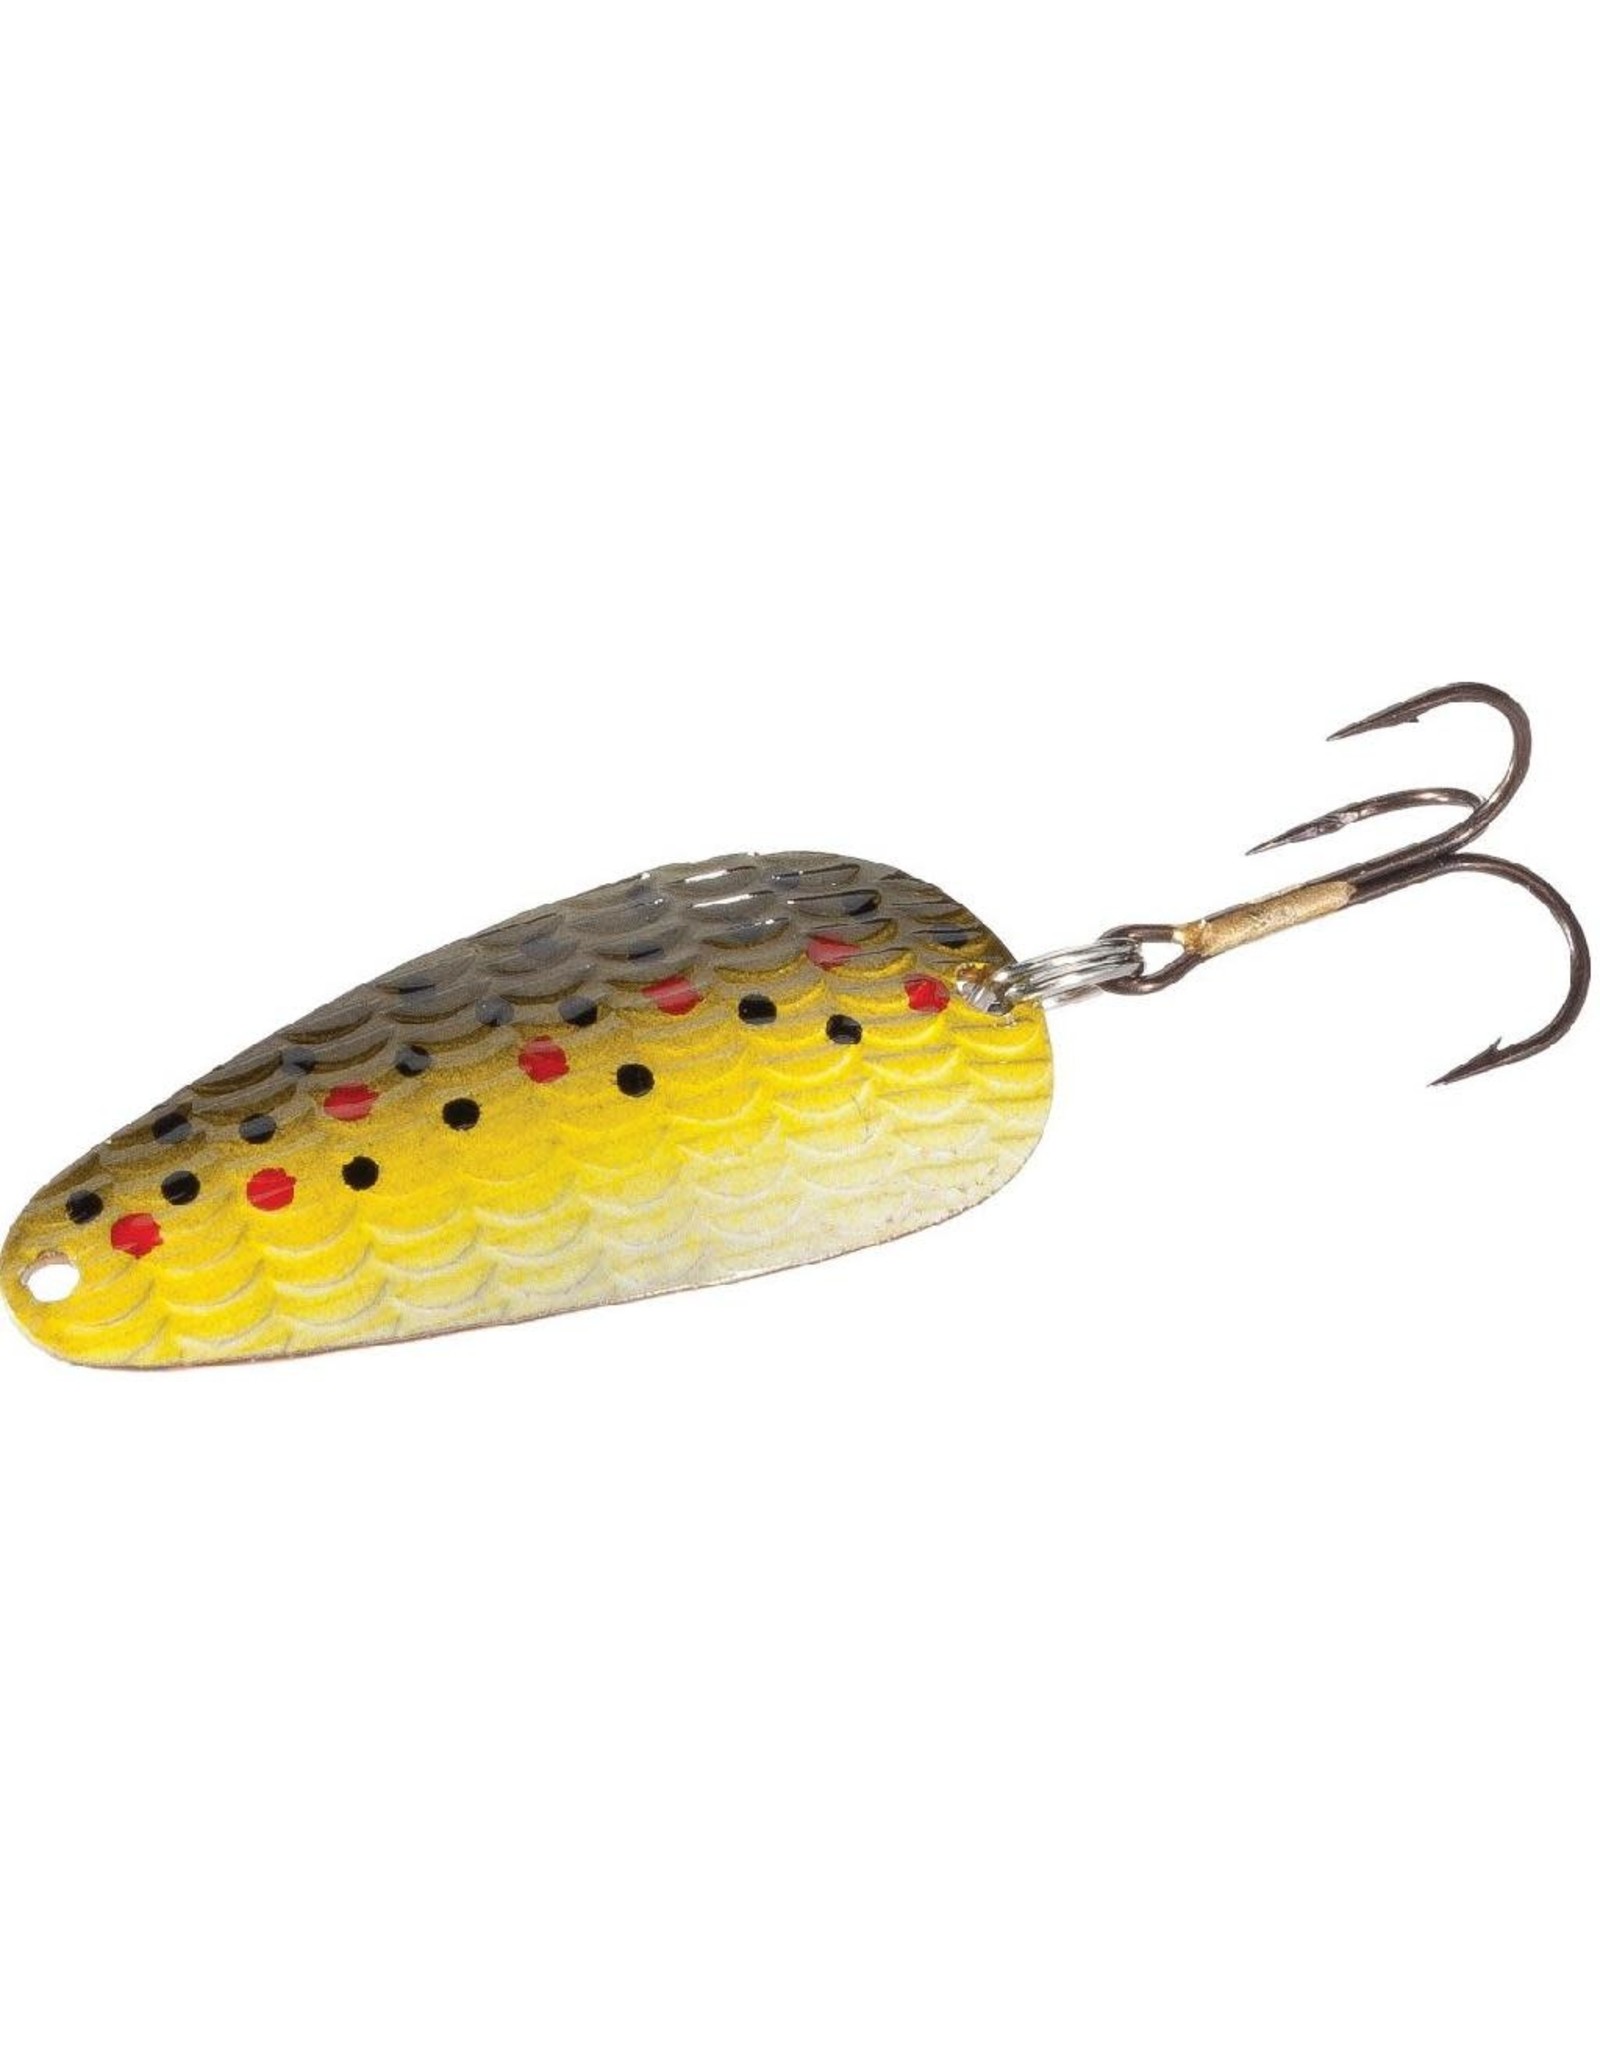 THOMAS 1/4 OZ CYCLONE BROWN TROUT - Larry's Sporting Goods